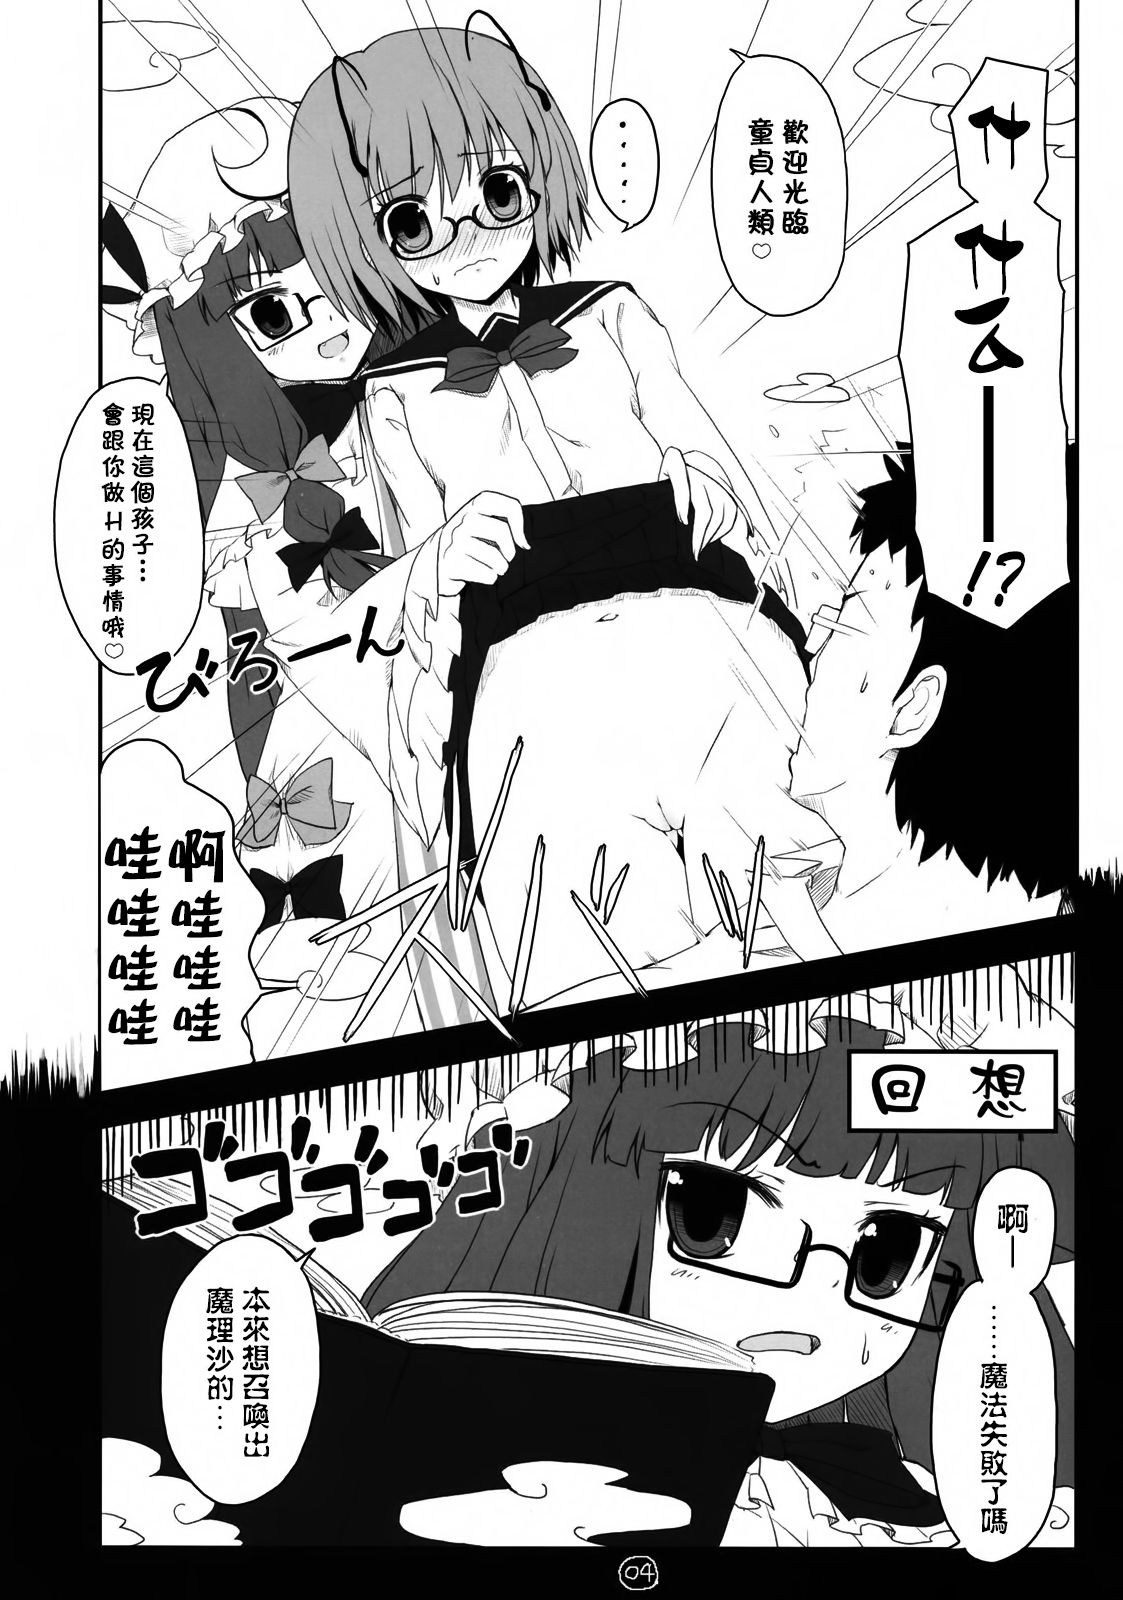 (C75) [Itou Life] Touhou Megane (Touhou Project) [Chinese] [无毒汉化组] (C75) [伊東ライフ] 東方眼鏡 (東方Project) [中国翻訳]